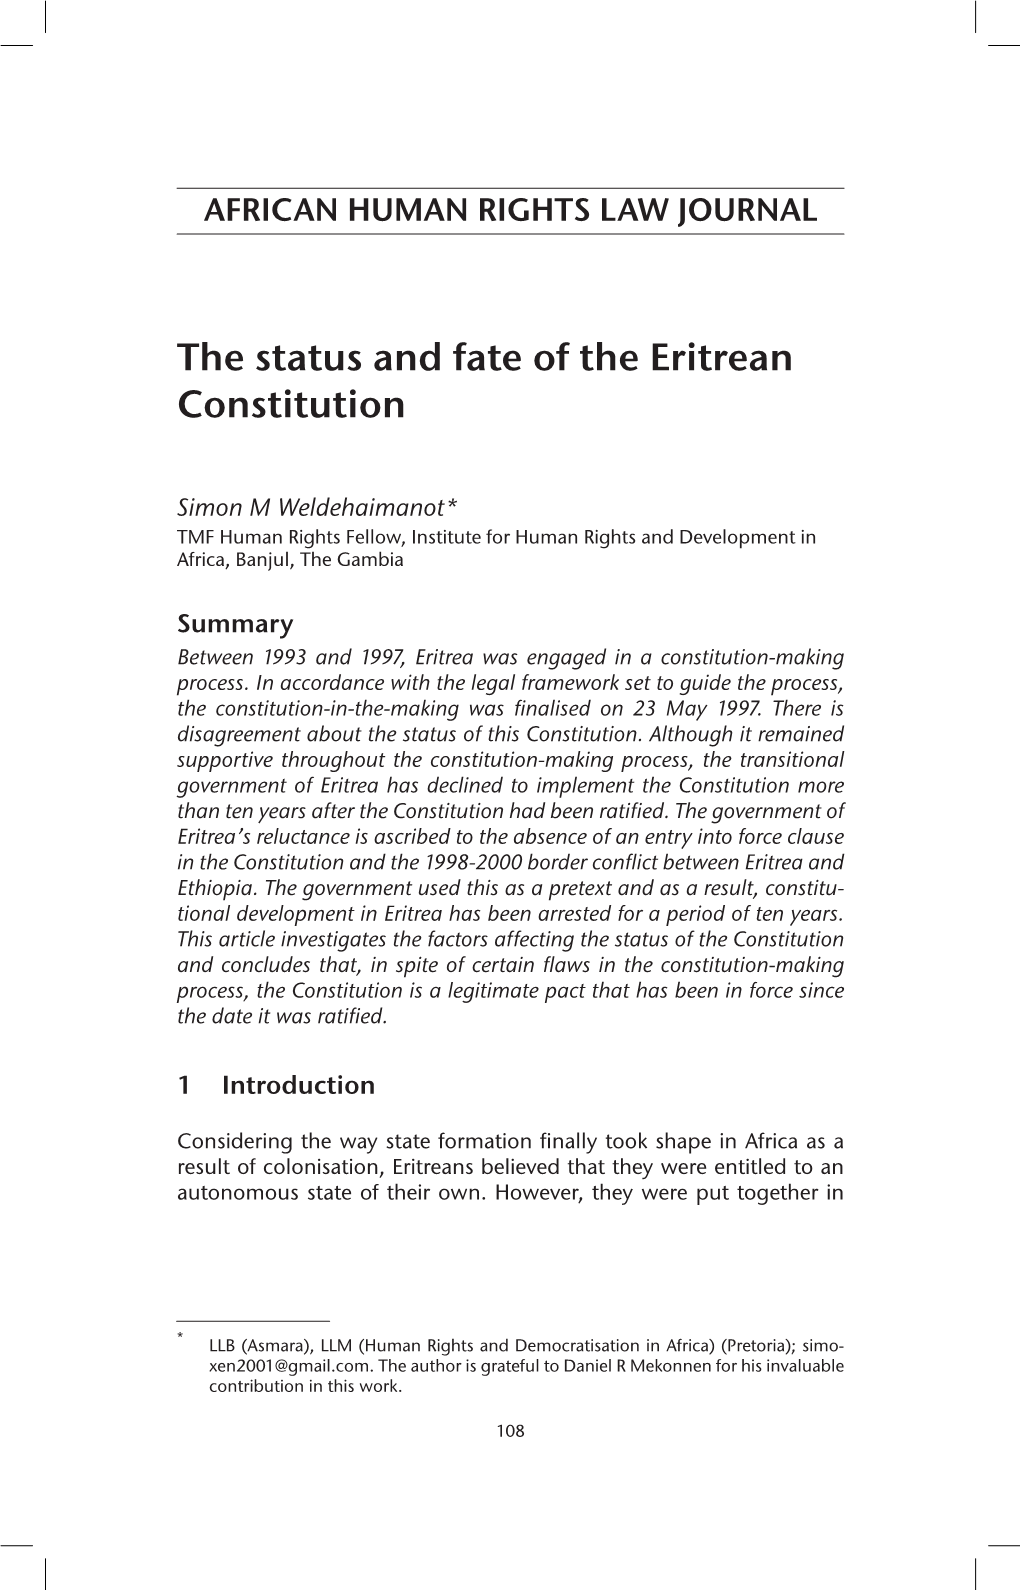 The Status and Fate of the Eritrean Constitution